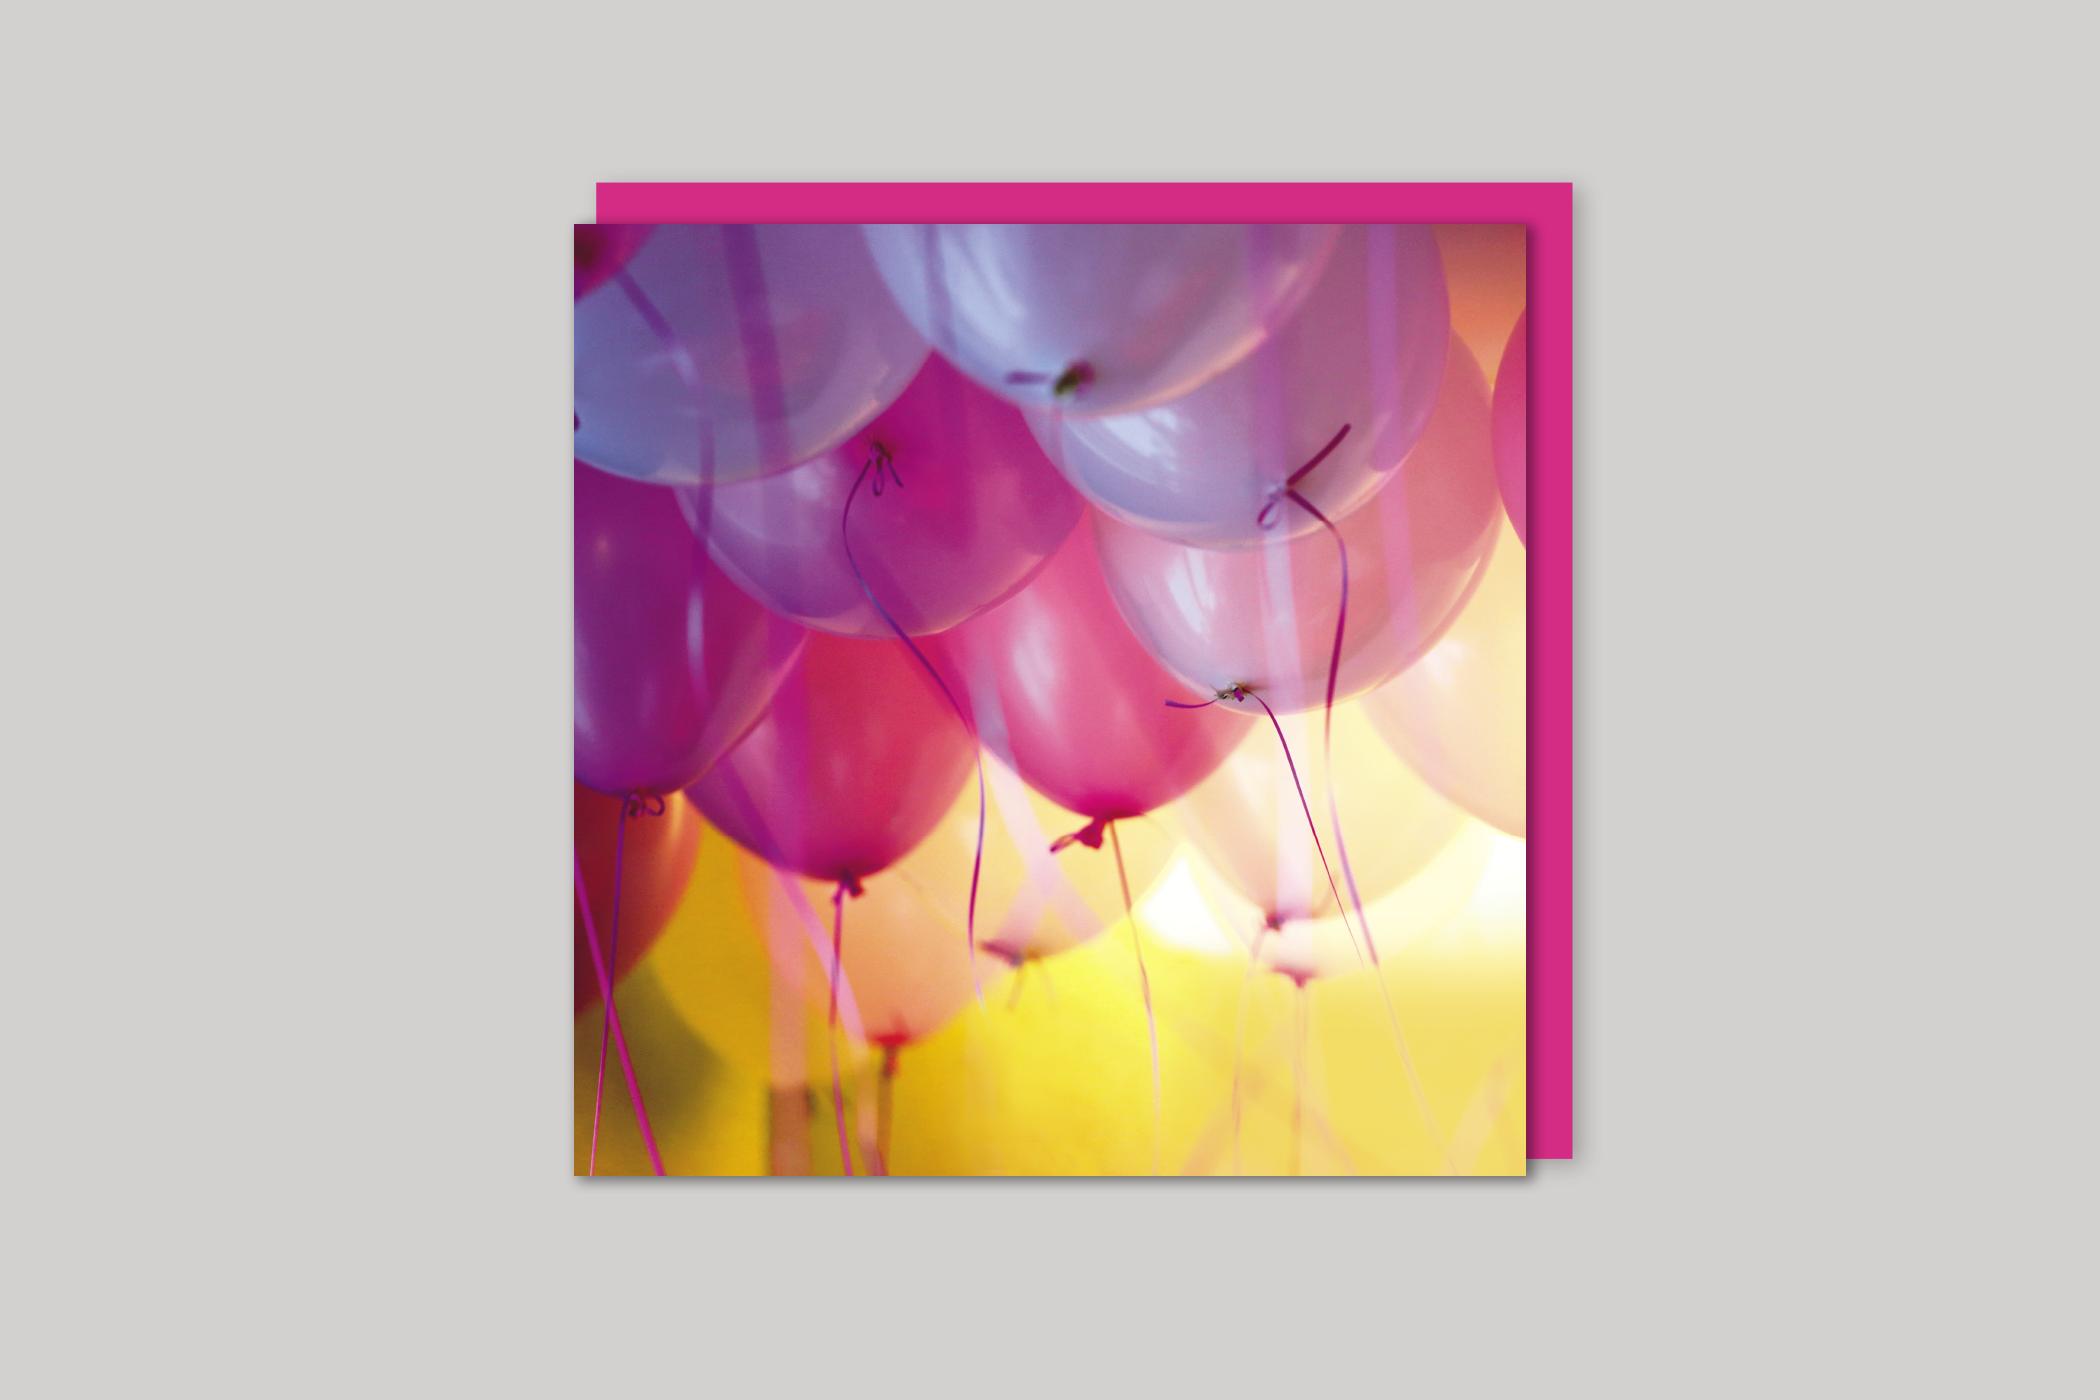 Party Balloons from Exposure range of photographic cards by Icon, back page.